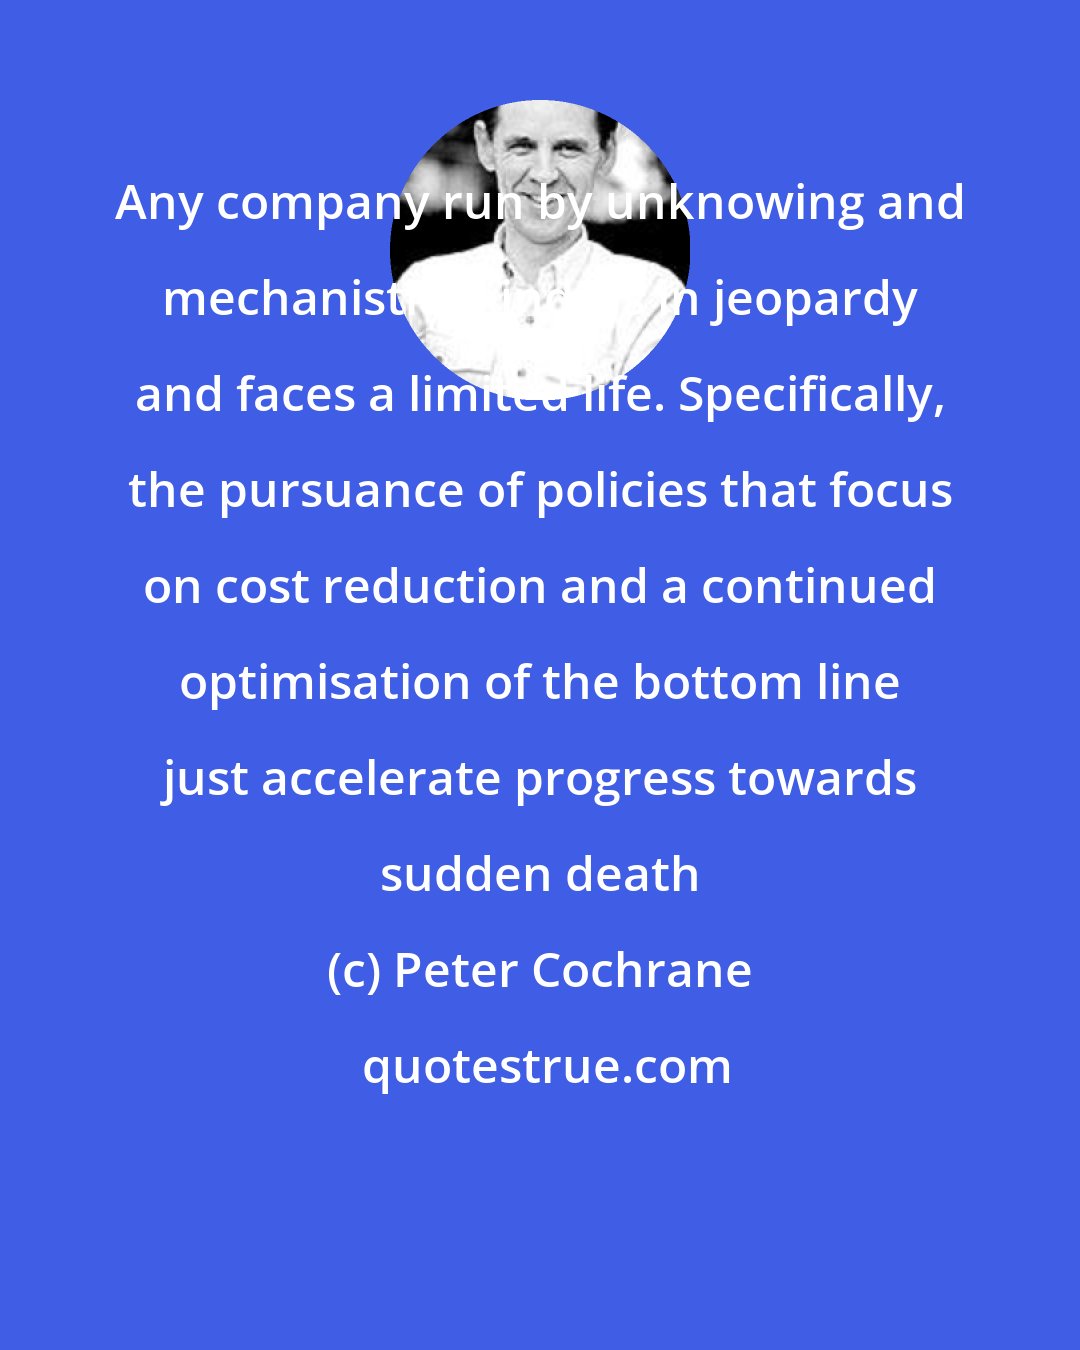 Peter Cochrane: Any company run by unknowing and mechanistic minds is in jeopardy and faces a limited life. Specifically, the pursuance of policies that focus on cost reduction and a continued optimisation of the bottom line just accelerate progress towards sudden death